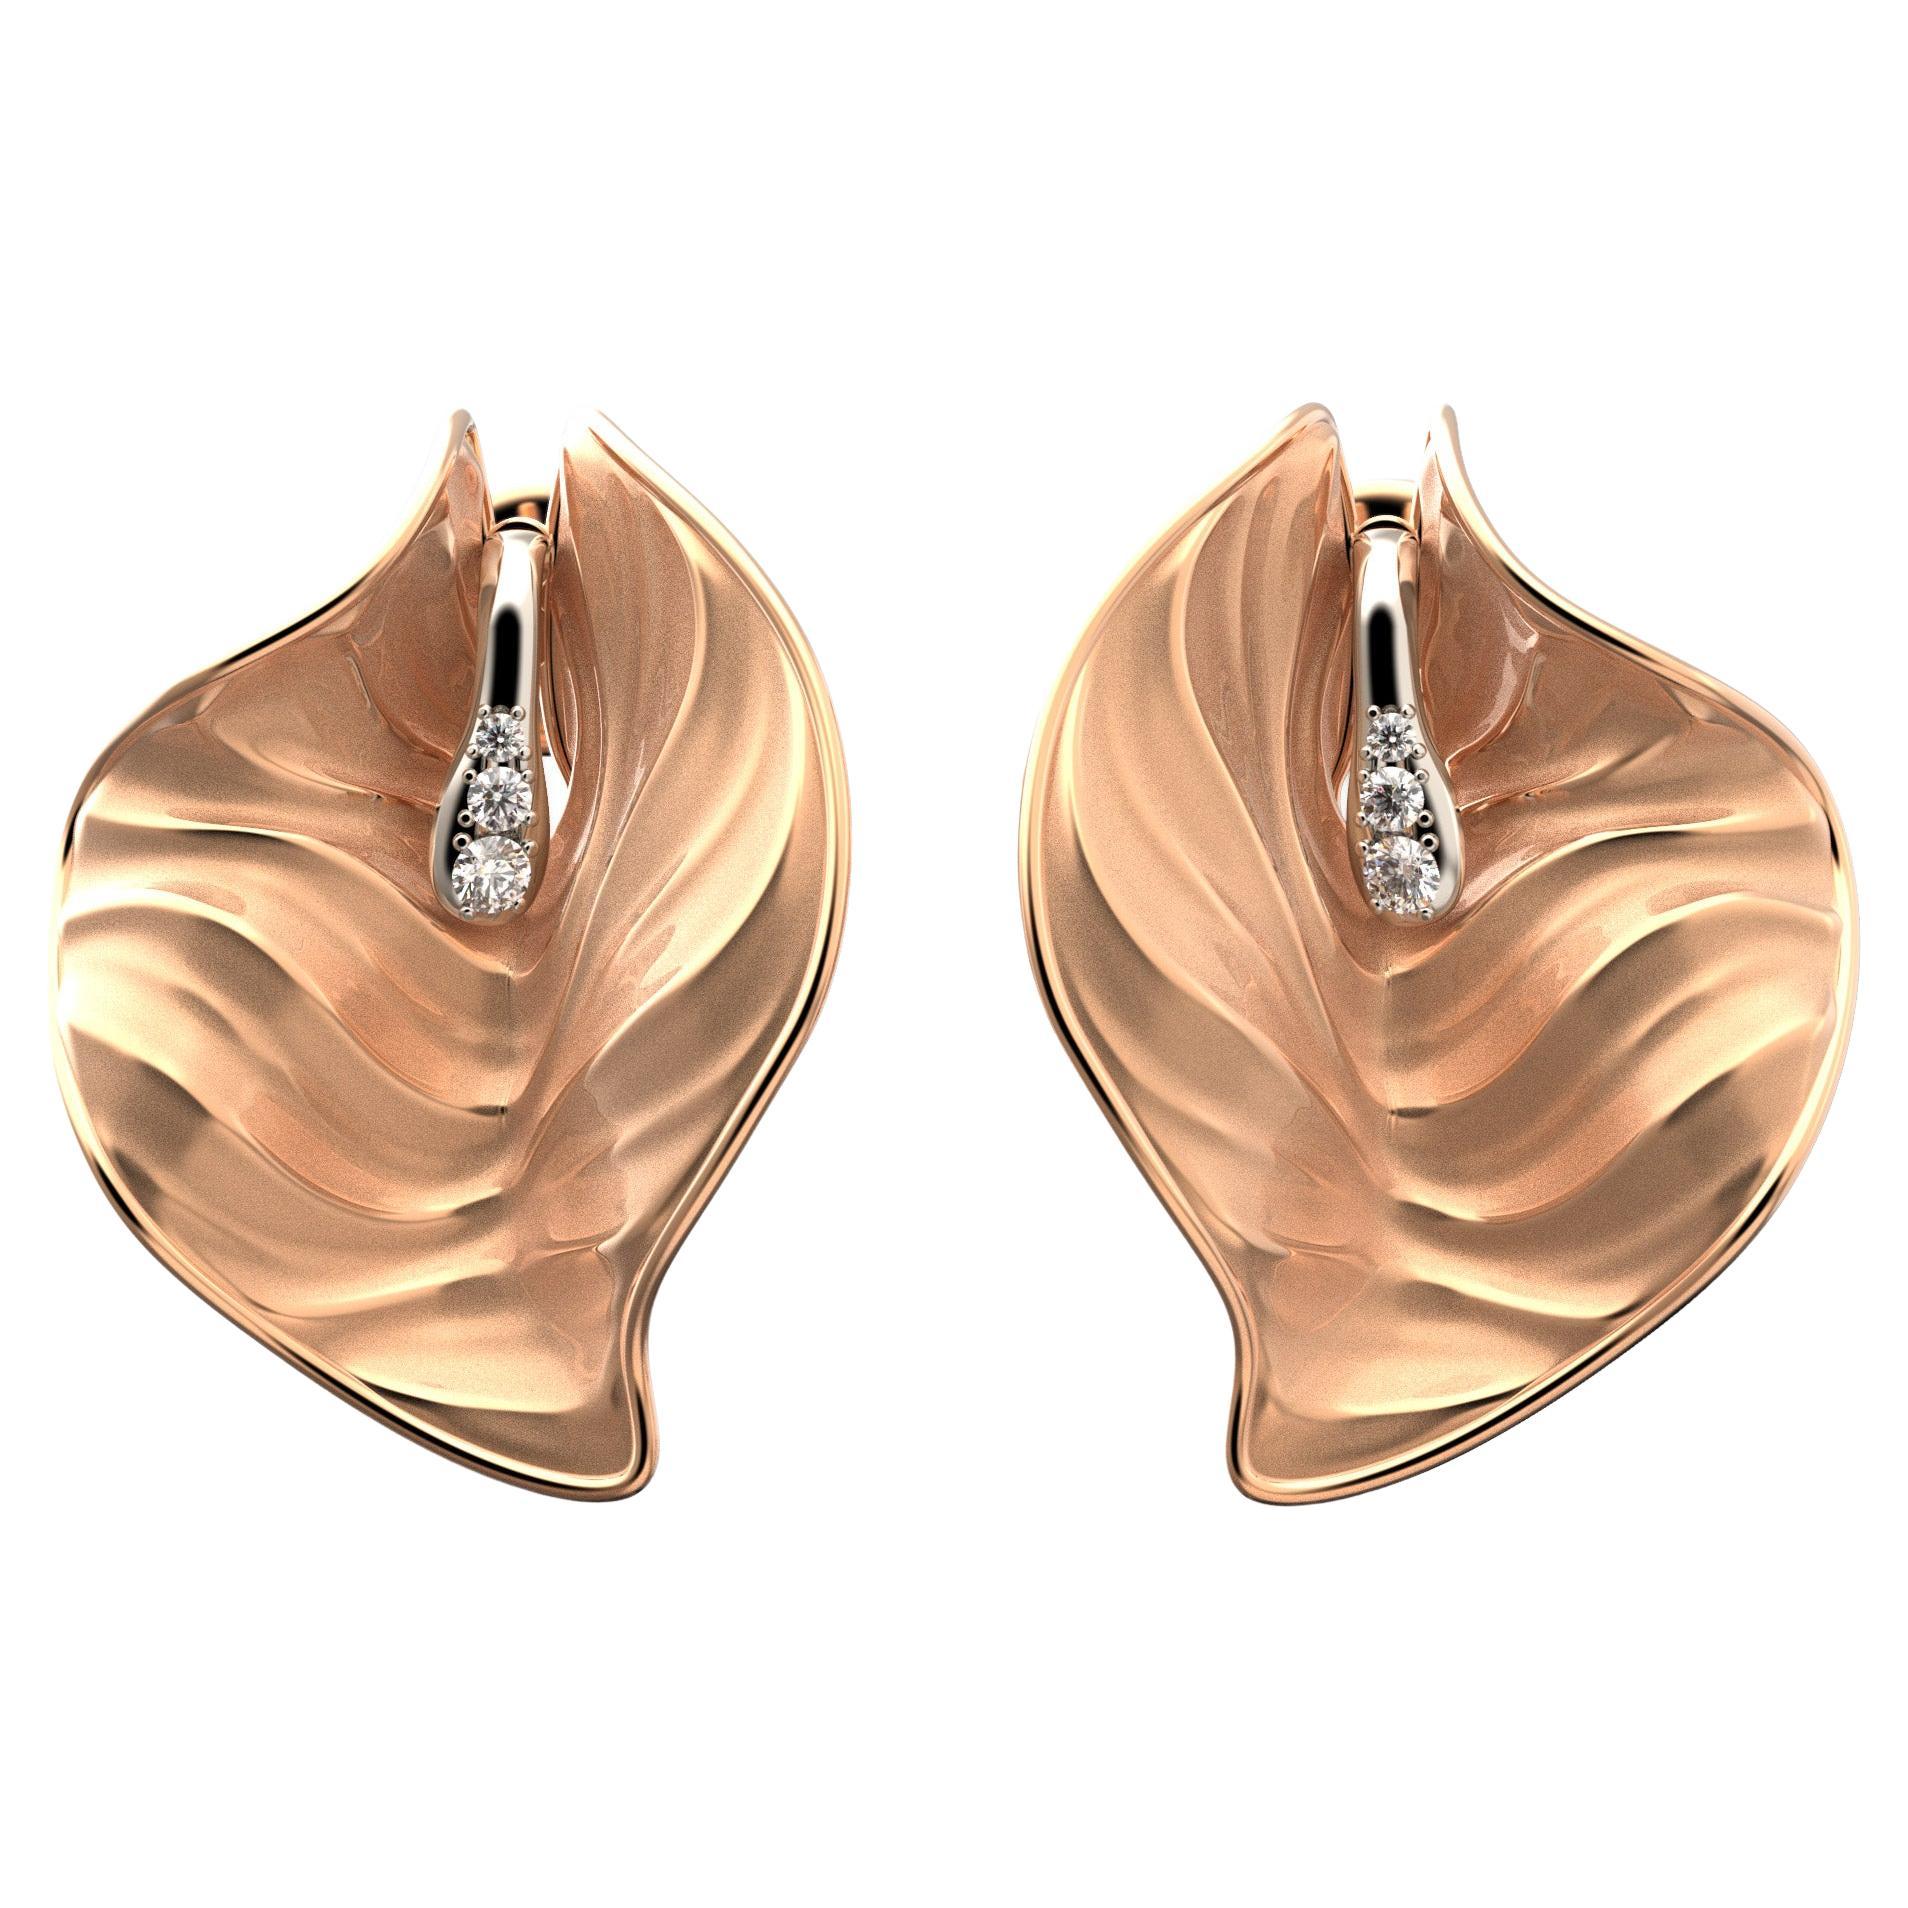 18k Gold Diamond Earrings, Oltremare Gioielli Fine Jewelry Made in Italy For Sale